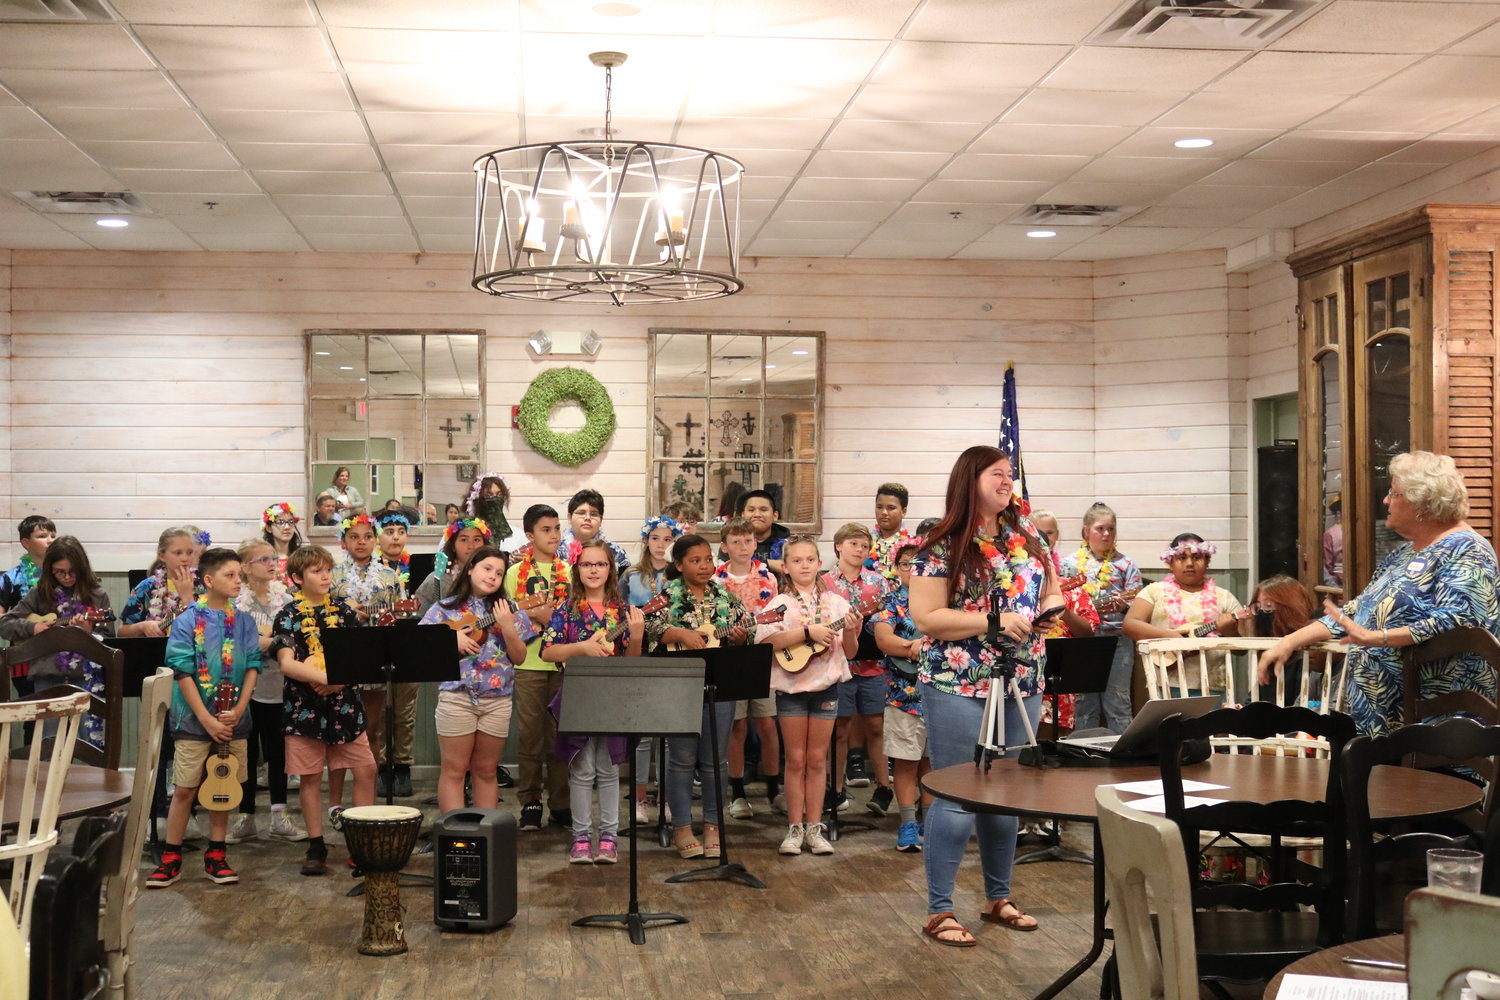 Students from Foley Elementary School recently performed three songs on ukuleles for the Foley Optimist Club. The school’s ukulele club consists of fourth, fifth and sixth grade students and offers students who enjoy music but aren’t looking to join the band or choir the opportunity to learn an instrument and perform.